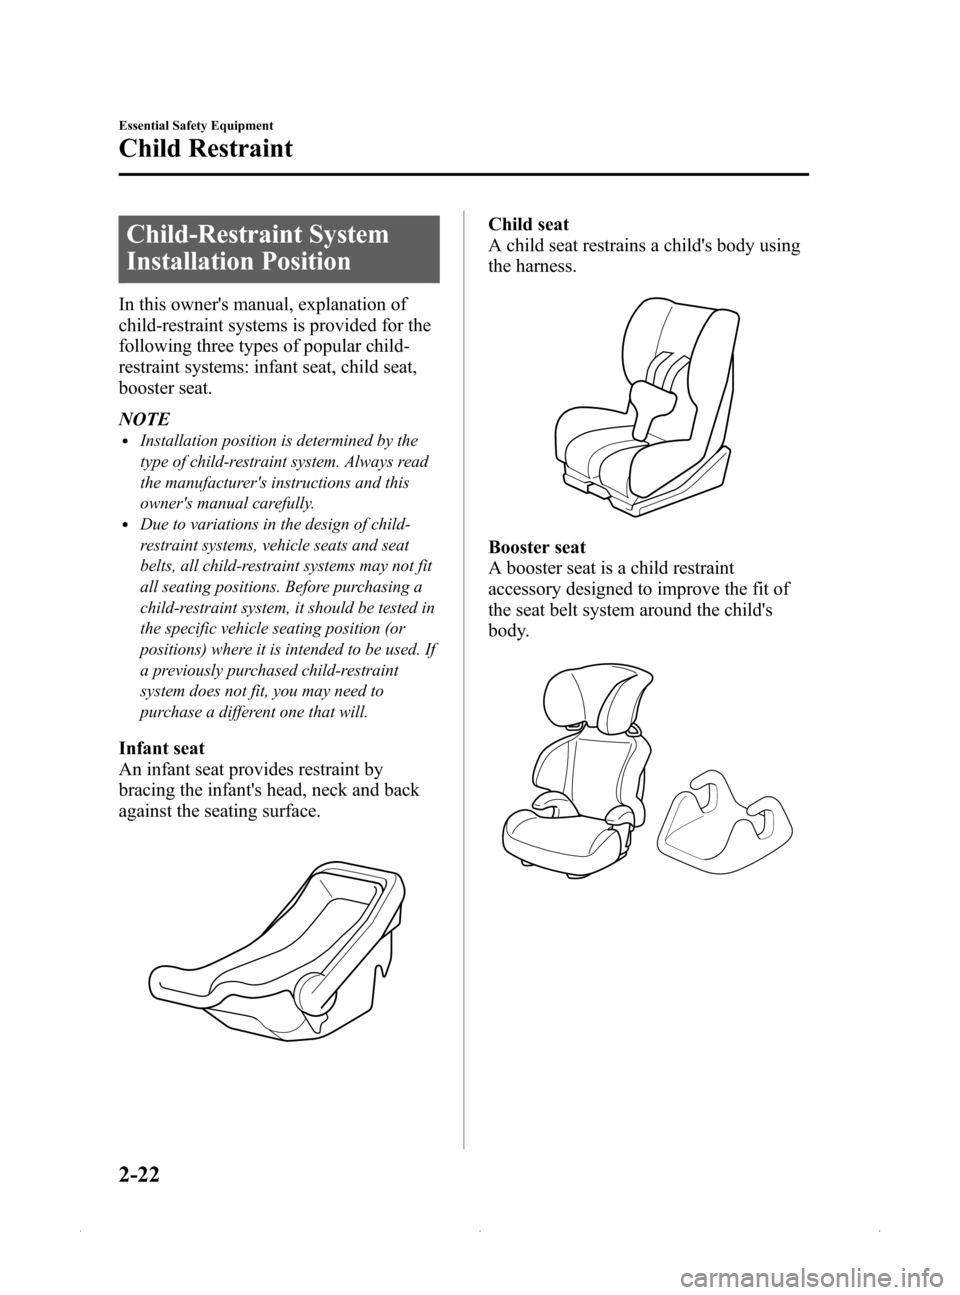 MAZDA MODEL MX-5 PRHT 2015  Owners Manual (in English) Black plate (34,1)
Child-Restraint System
Installation Position
In this owners manual, explanation of
child-restraint systems is provided for the
following three types of popular child-
restraint sys